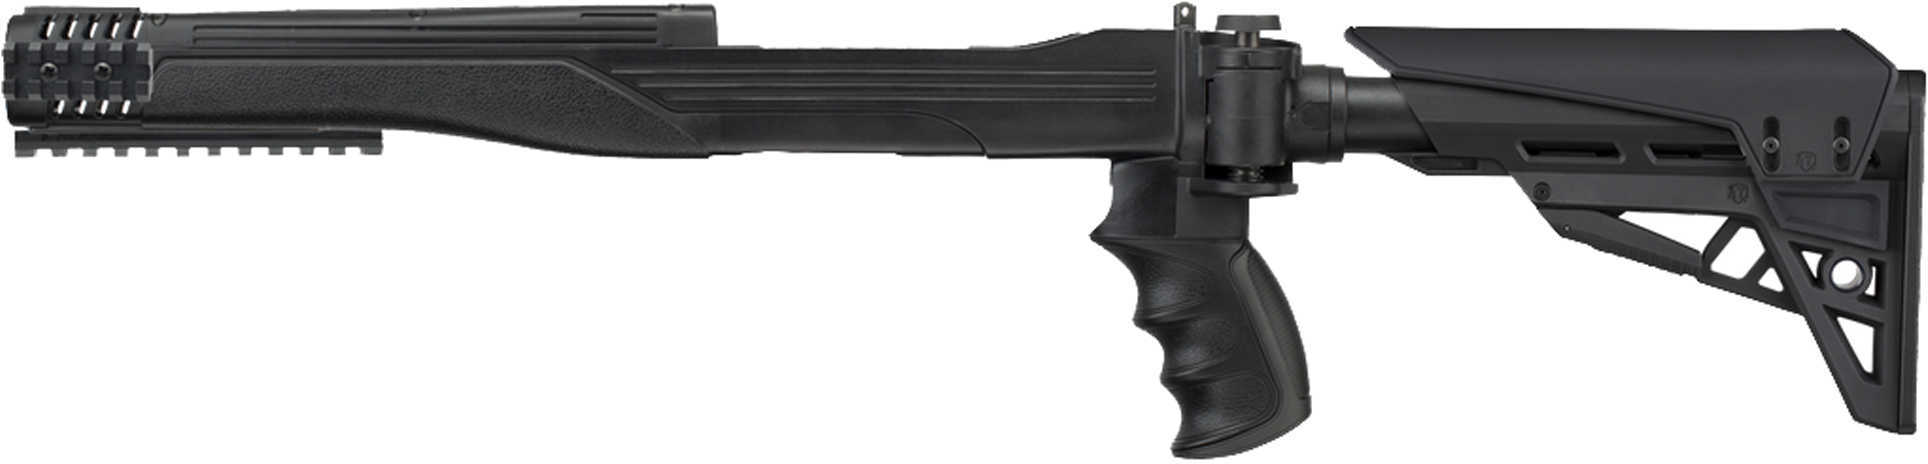 ATI Ruger® 10/22® TactLite Strikeforce Six Position Adjustable Side Folding Stock With Scorpion Recoil System